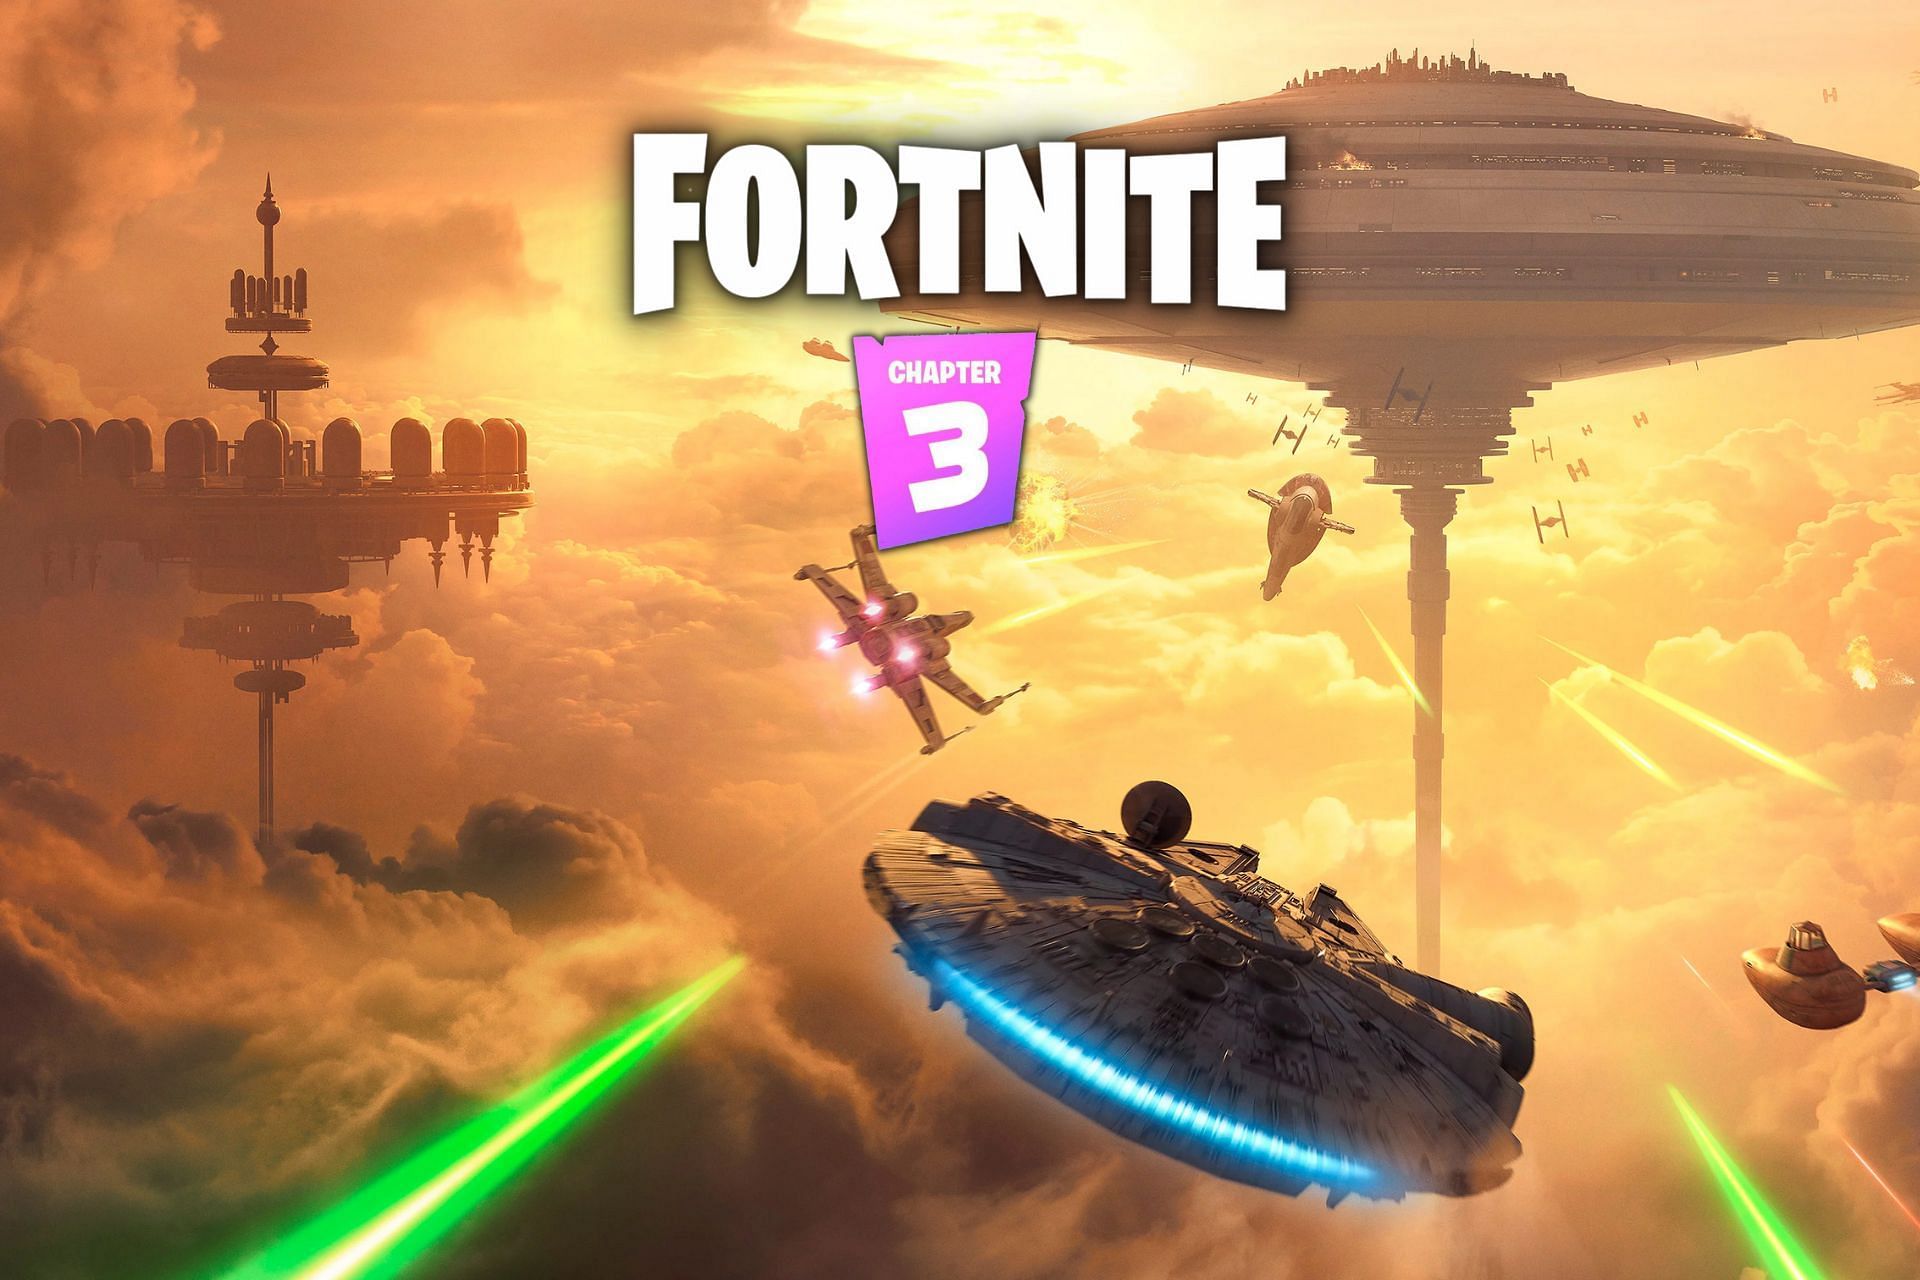 Darth Vader and C-3PO may feature as skins in Fortnite Chapter 3 (Image via Sportskeeda)